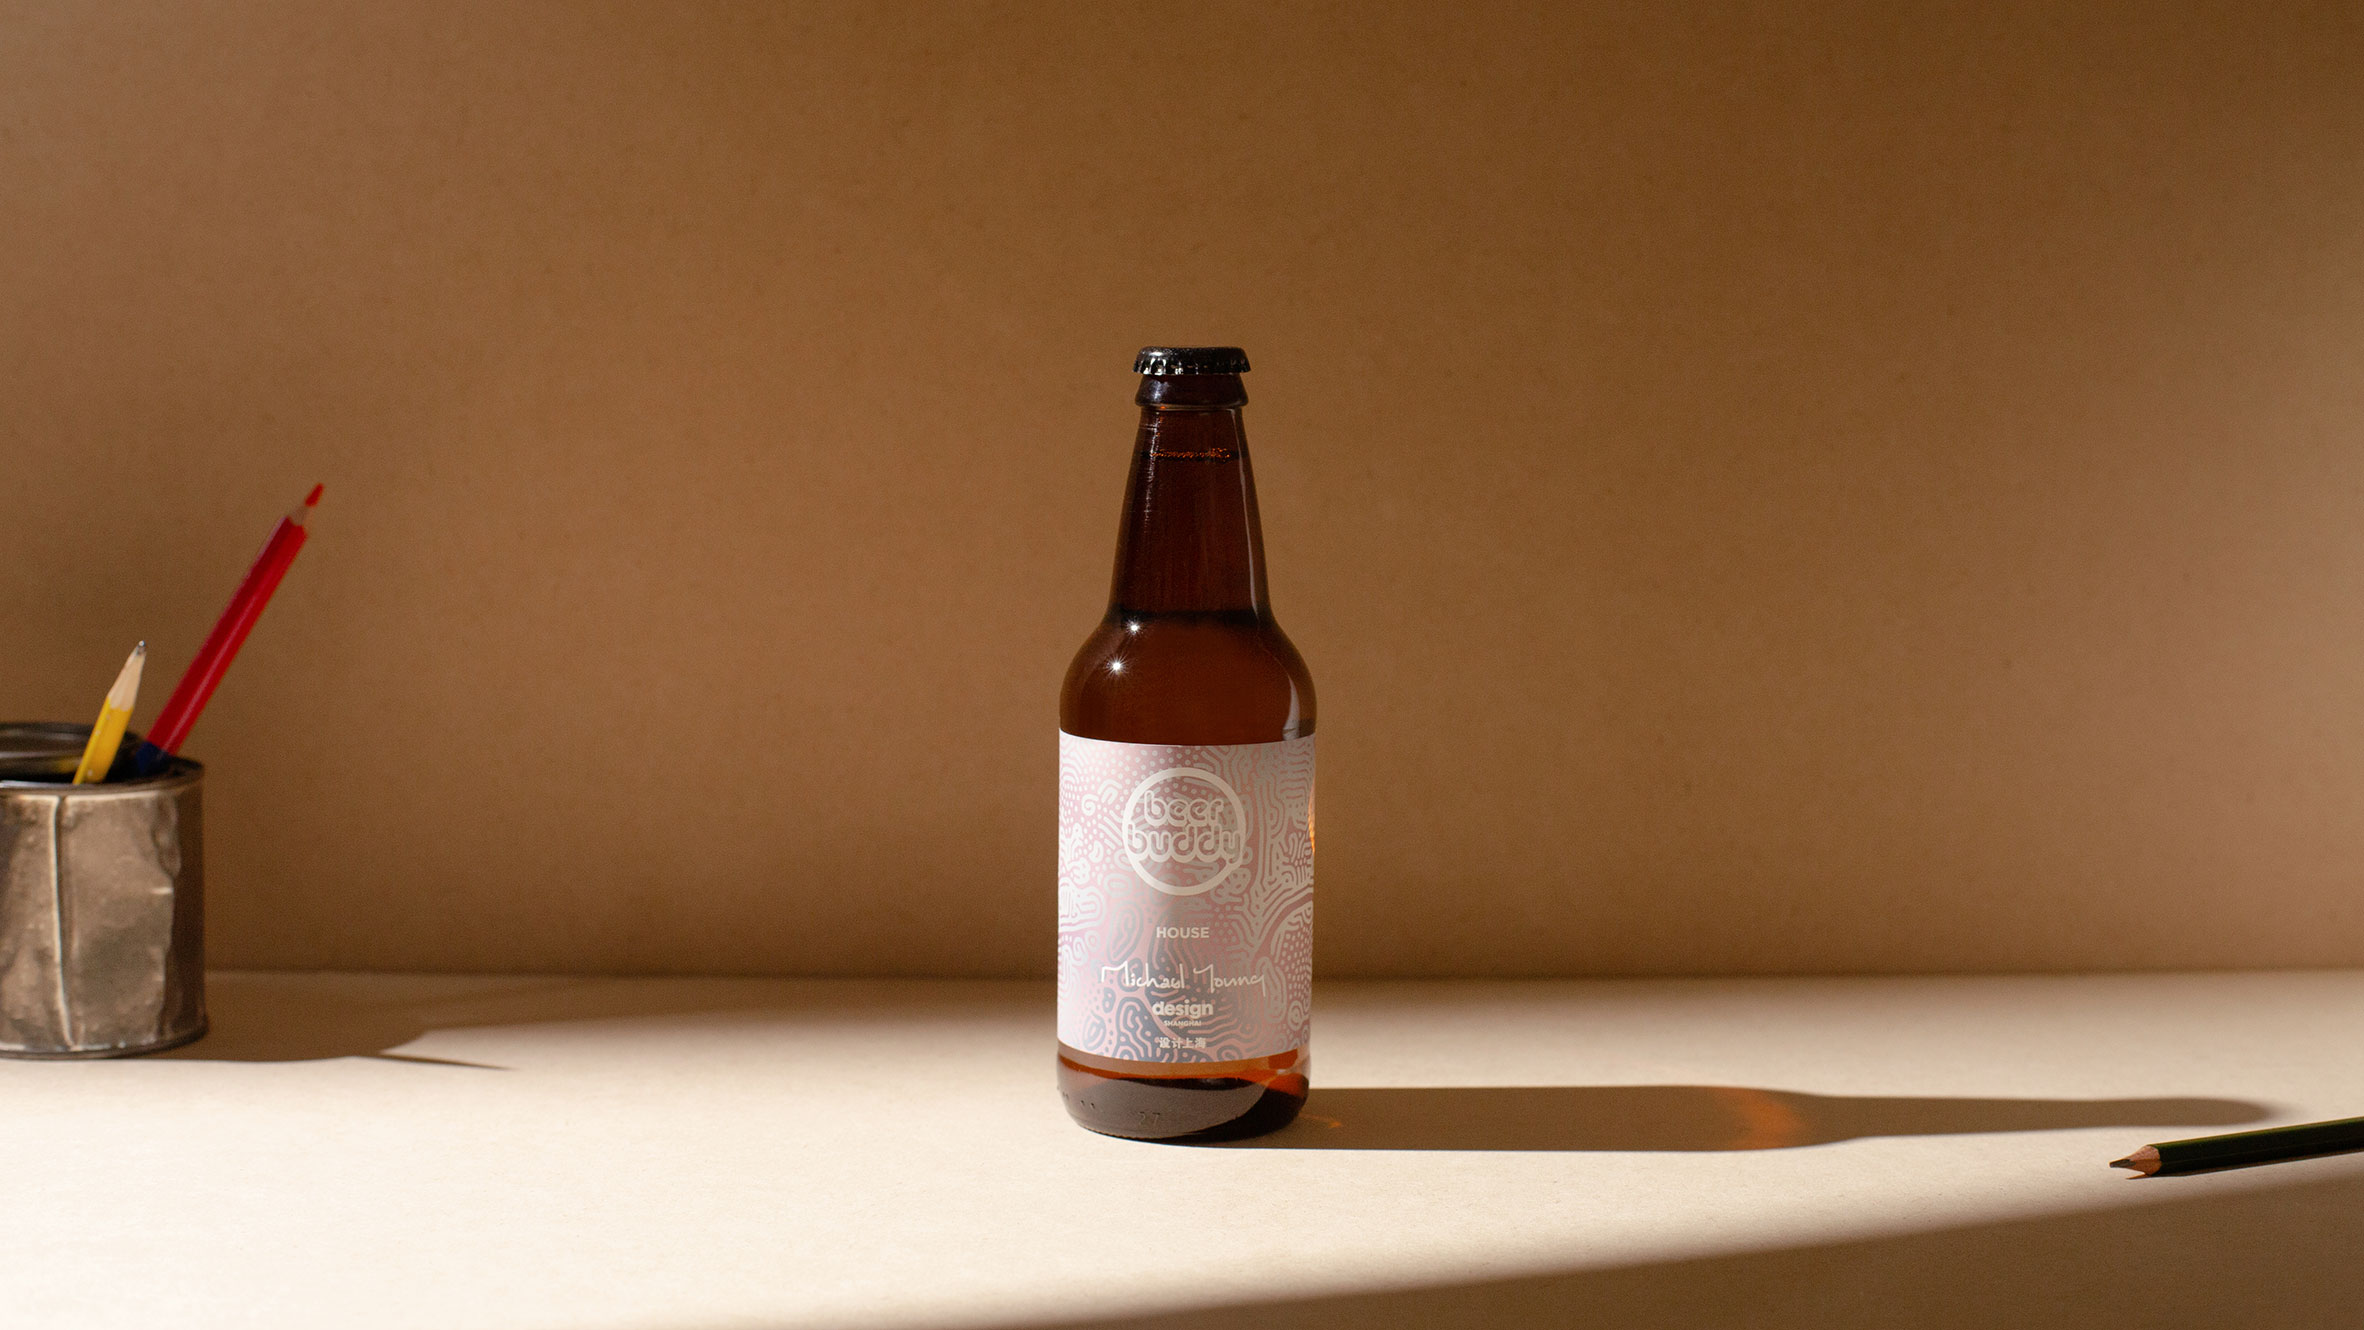 Designer Michael Young launches Beer Buddy drinks brand